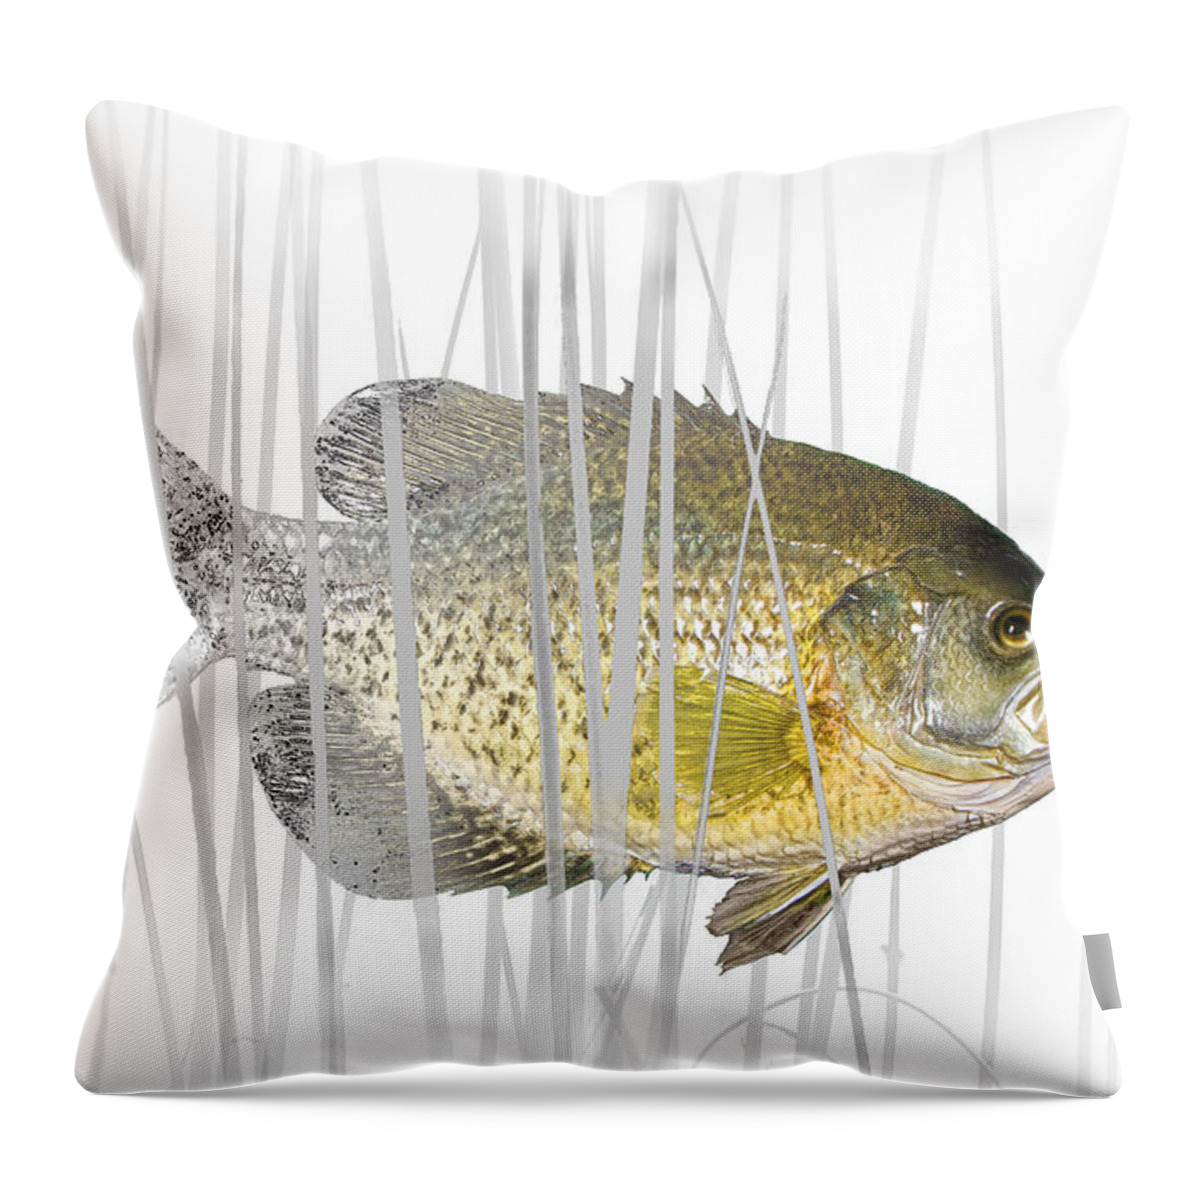 Crappie Throw Pillow featuring the photograph Black Crappie Pan Fish in the Reeds by Randall Nyhof